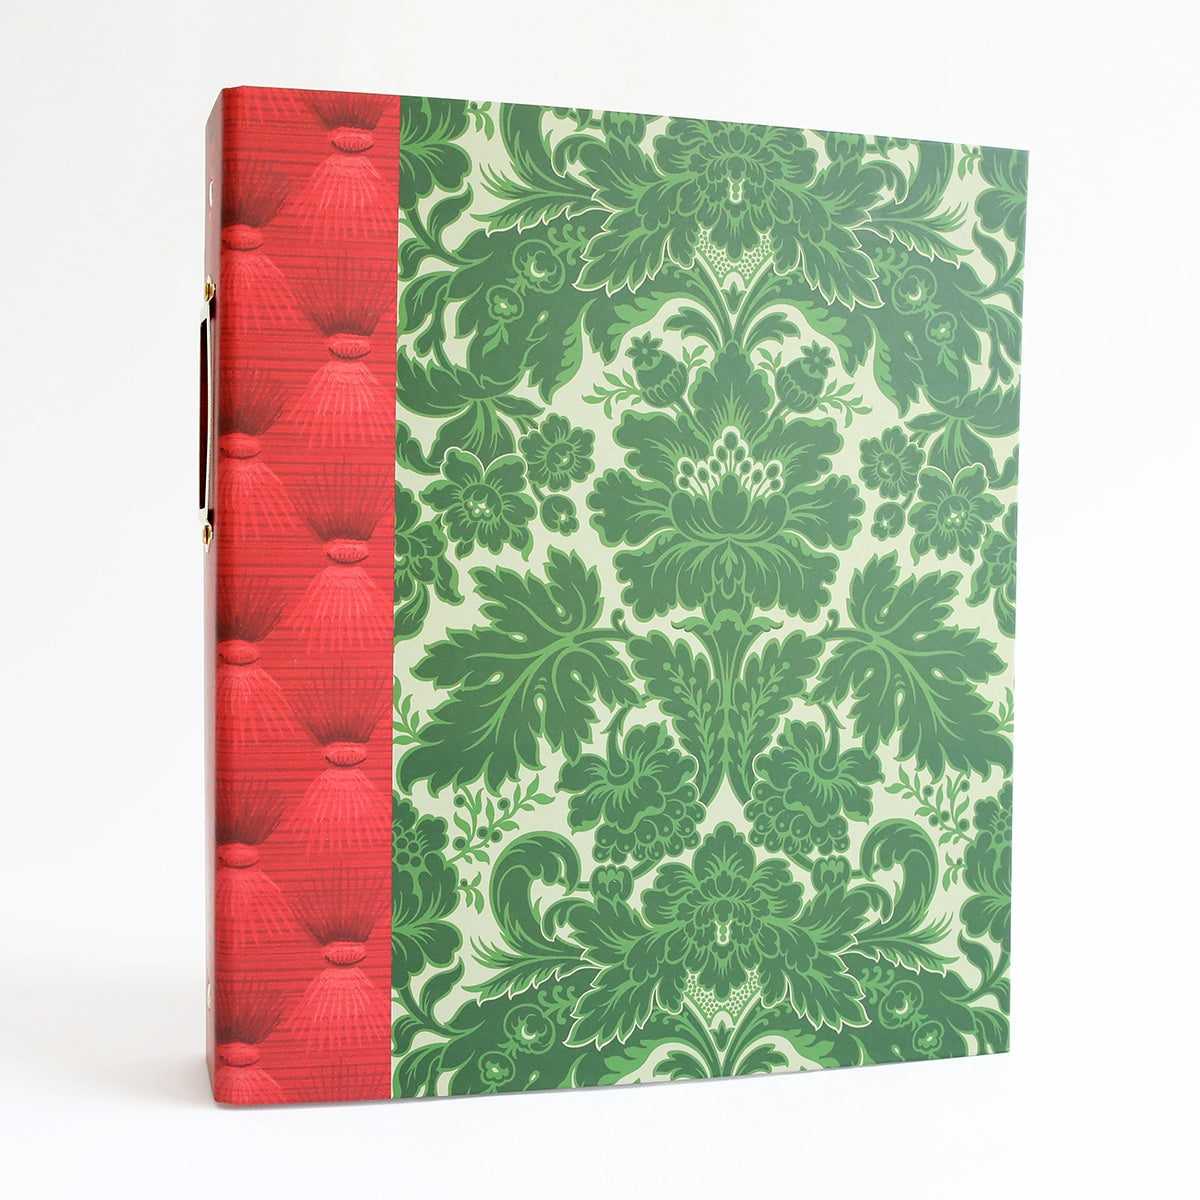 A green and red Holiday Die Storage Binder with a red cover.